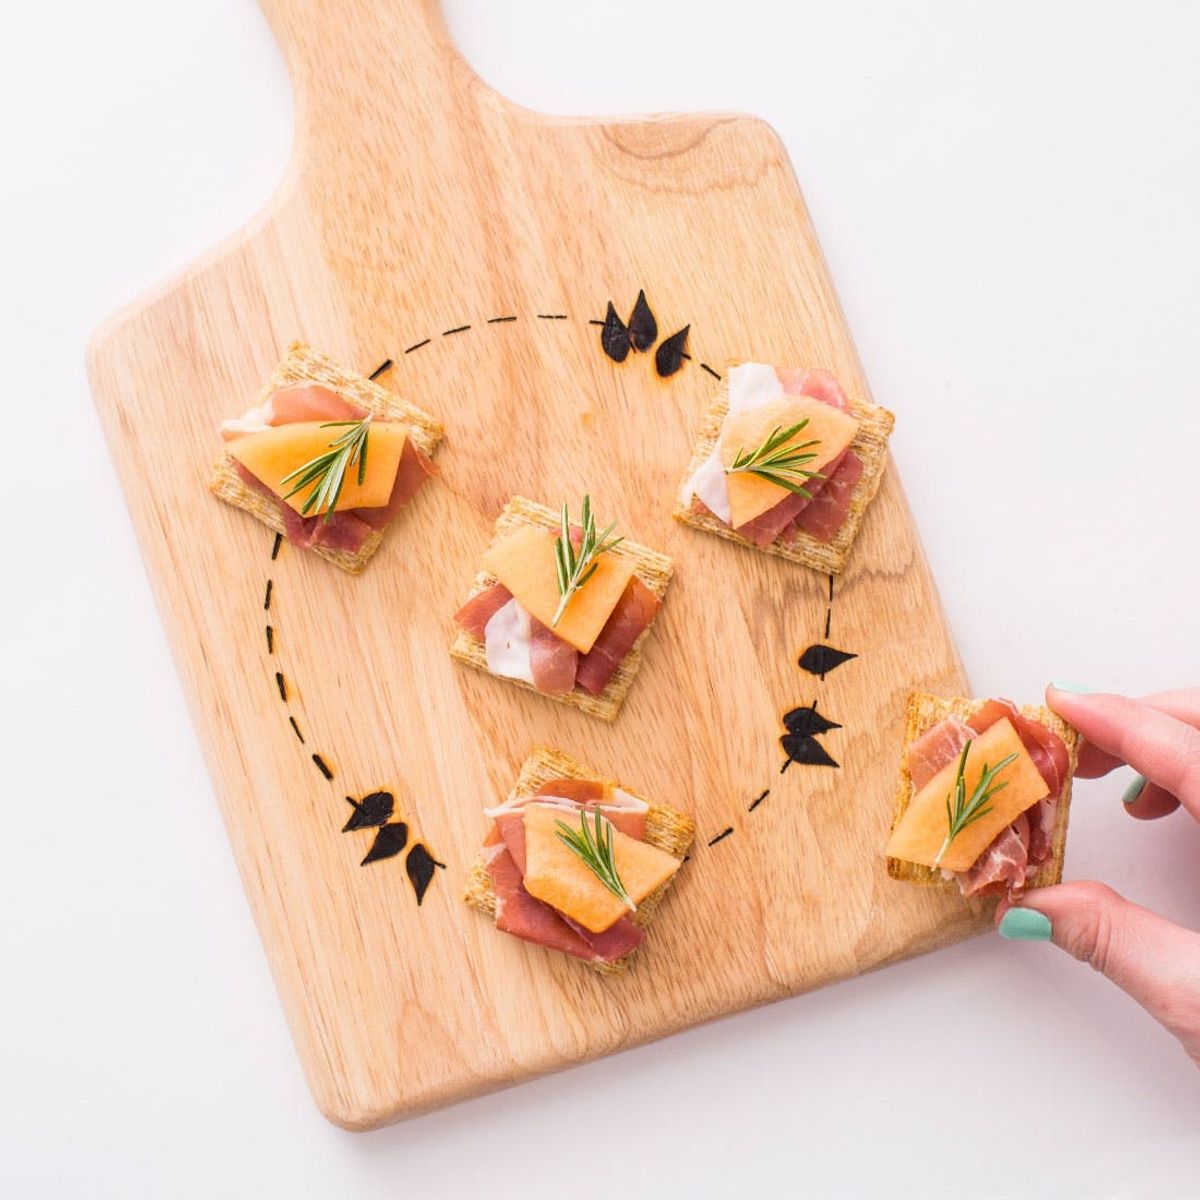 3 Creative Ways to Make a Wood-Burnt Serving Board